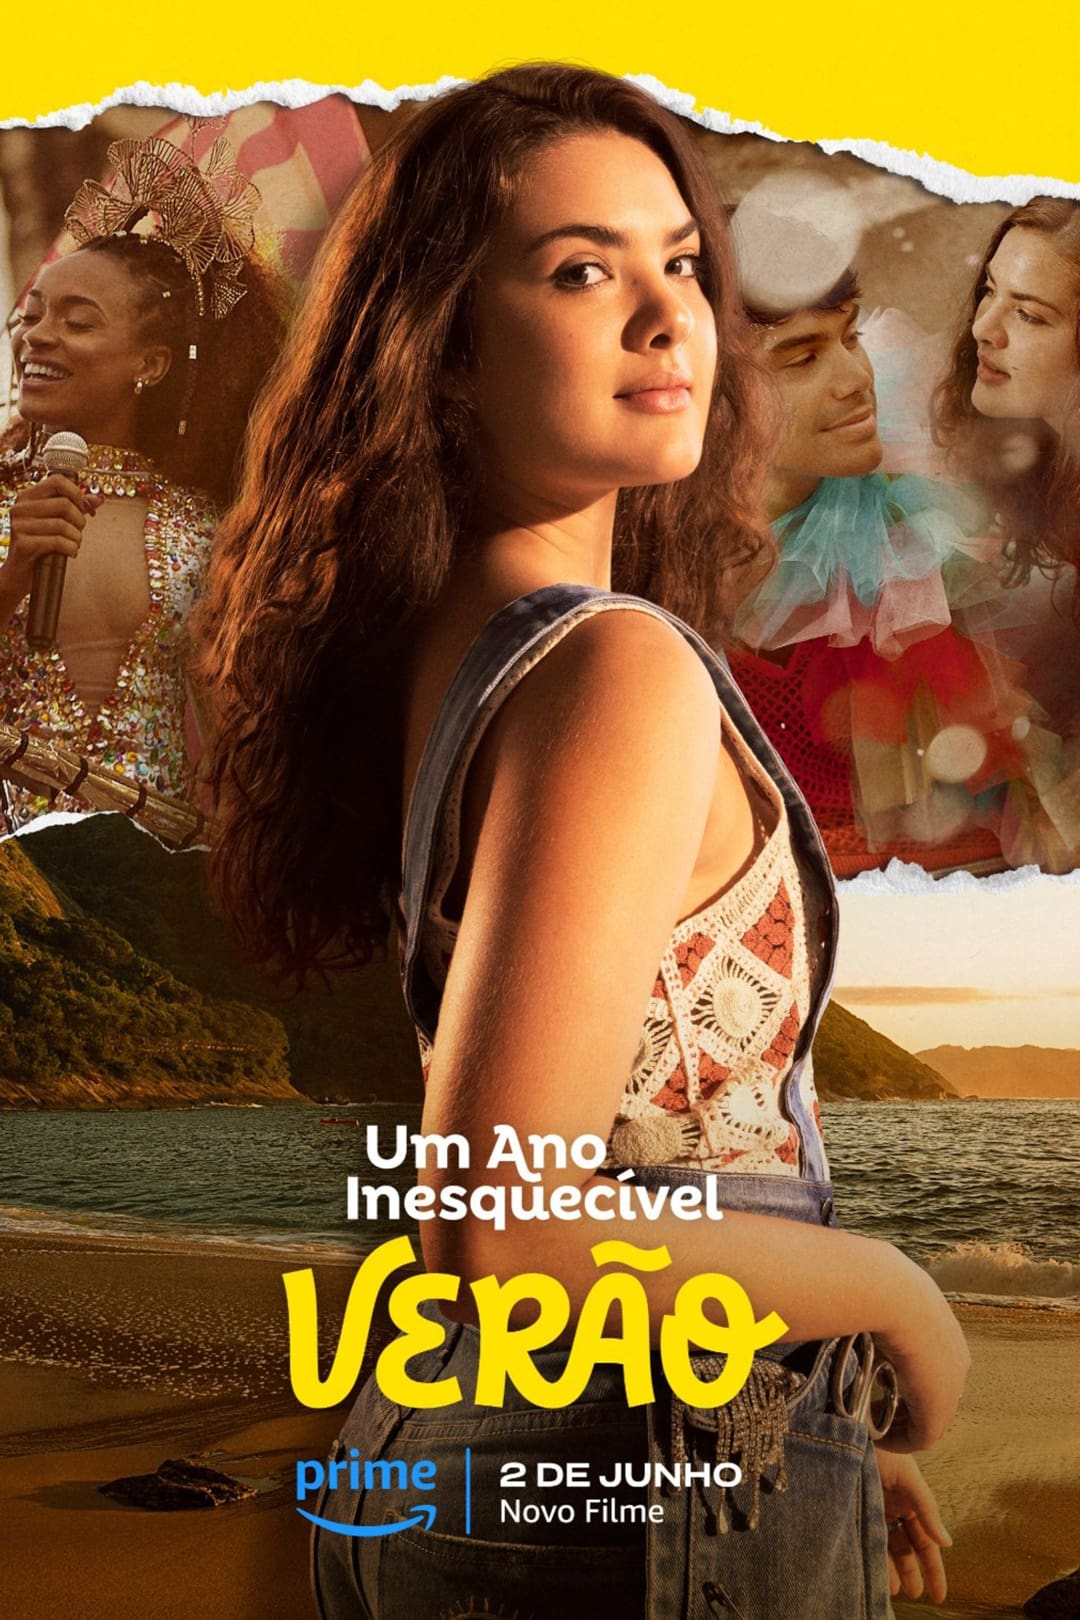 In order to study fashion in so-desired Paris, a young country girl who hates Carnival travels to Rio de Janeiro to try to get support from the most famous designer in Brazil. Set on sneaking into the sewing team of one of the biggest samba schools, she will discover that Carnival only lasts for a week, but a love story can change her entire life.